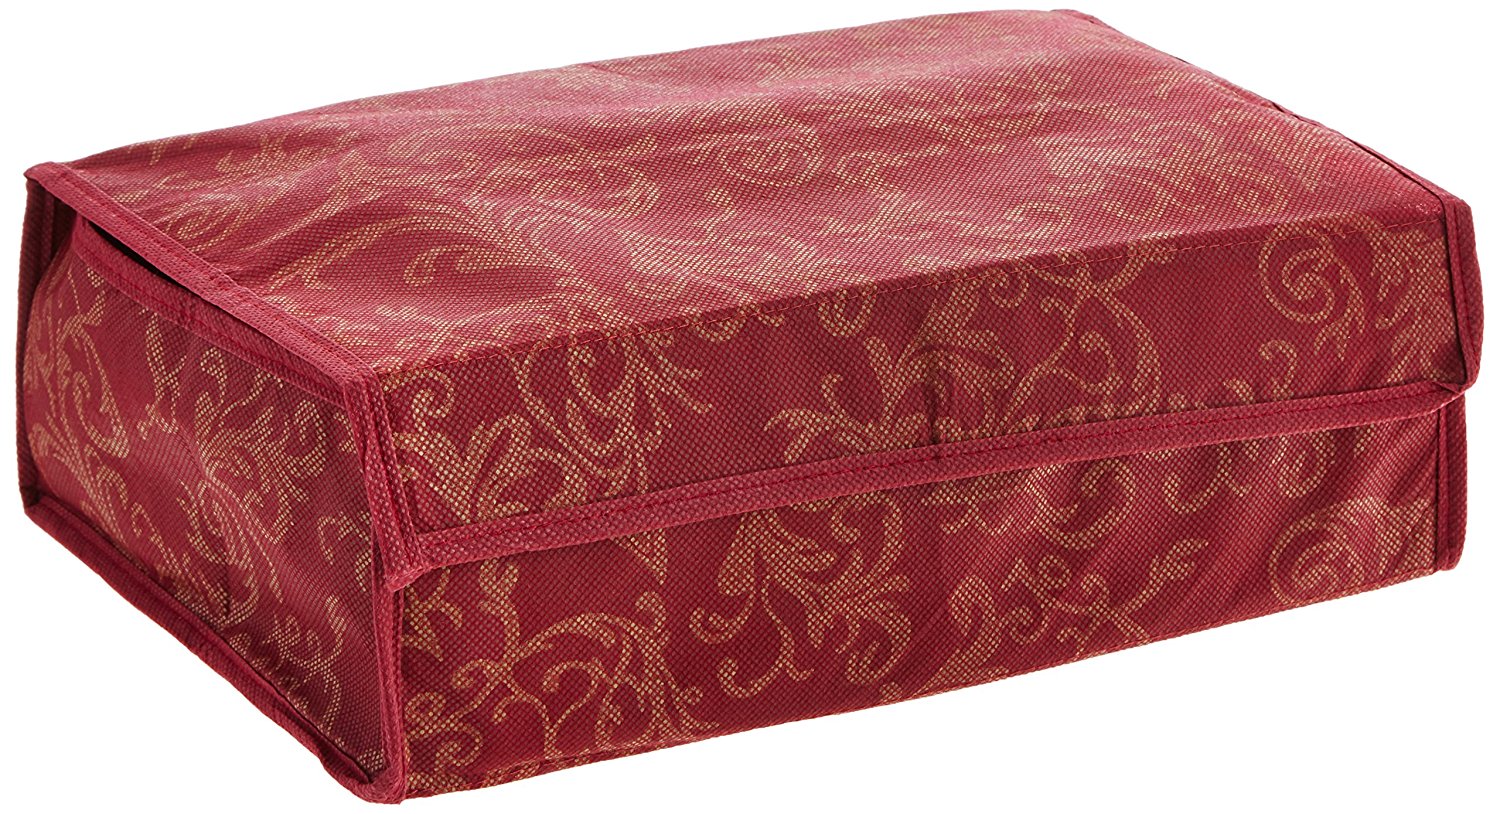 12 Compartment Intricate Leaf Pattern Soft-Cover Foldable Storage Box